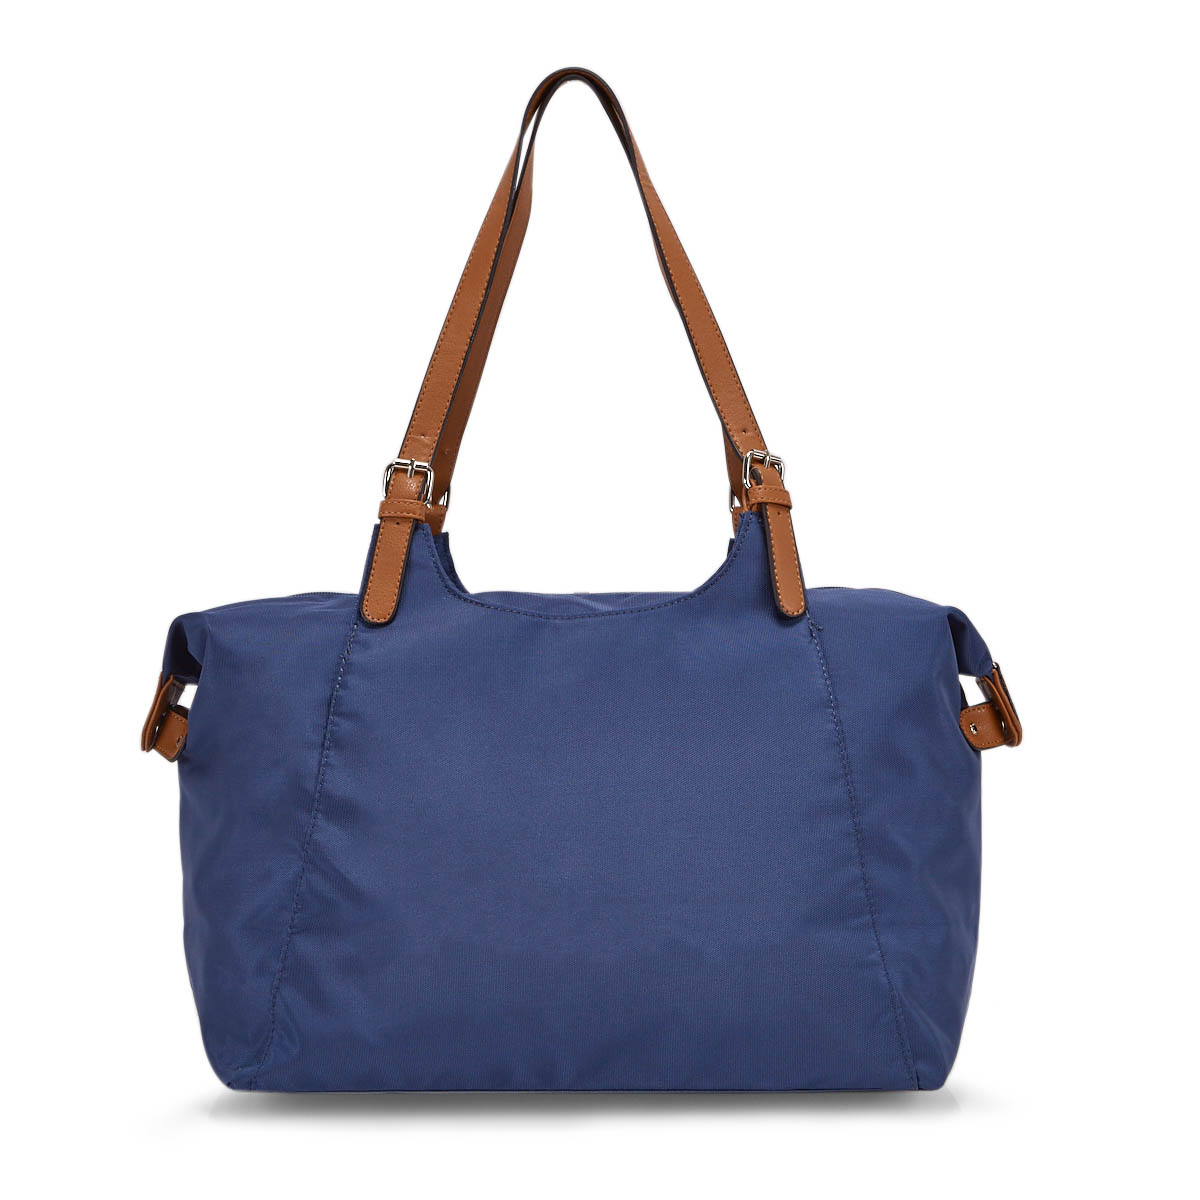 Roots Women's R4700 blue large tote bag | SoftMoc.com